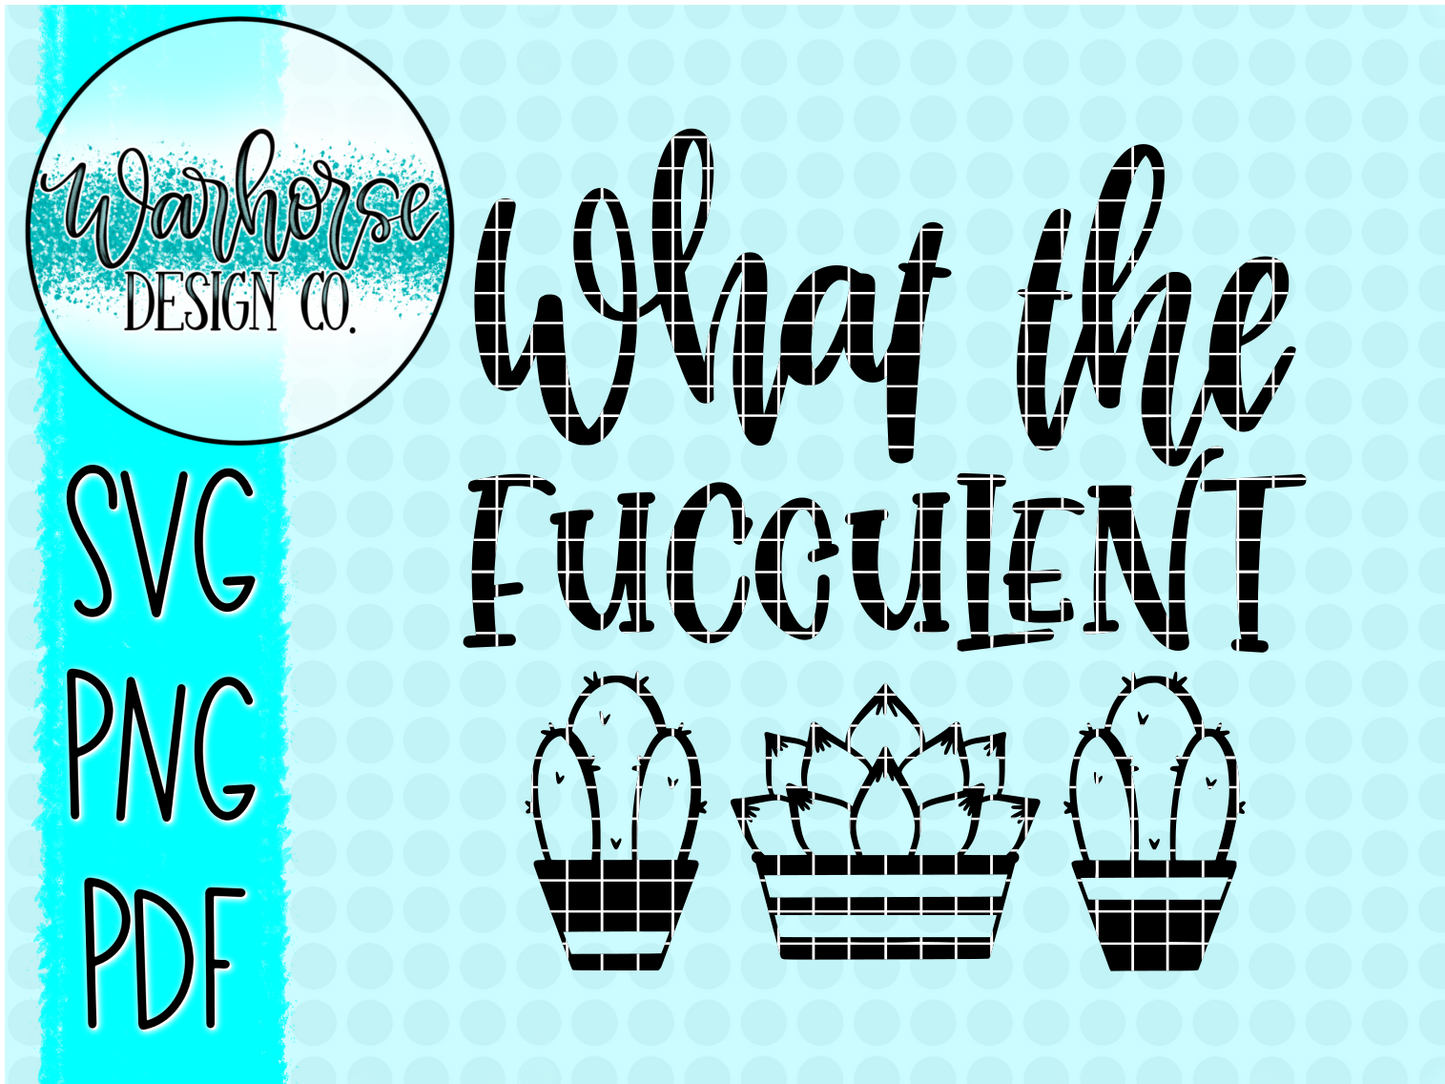 What the fucculent SVG PNG PDF